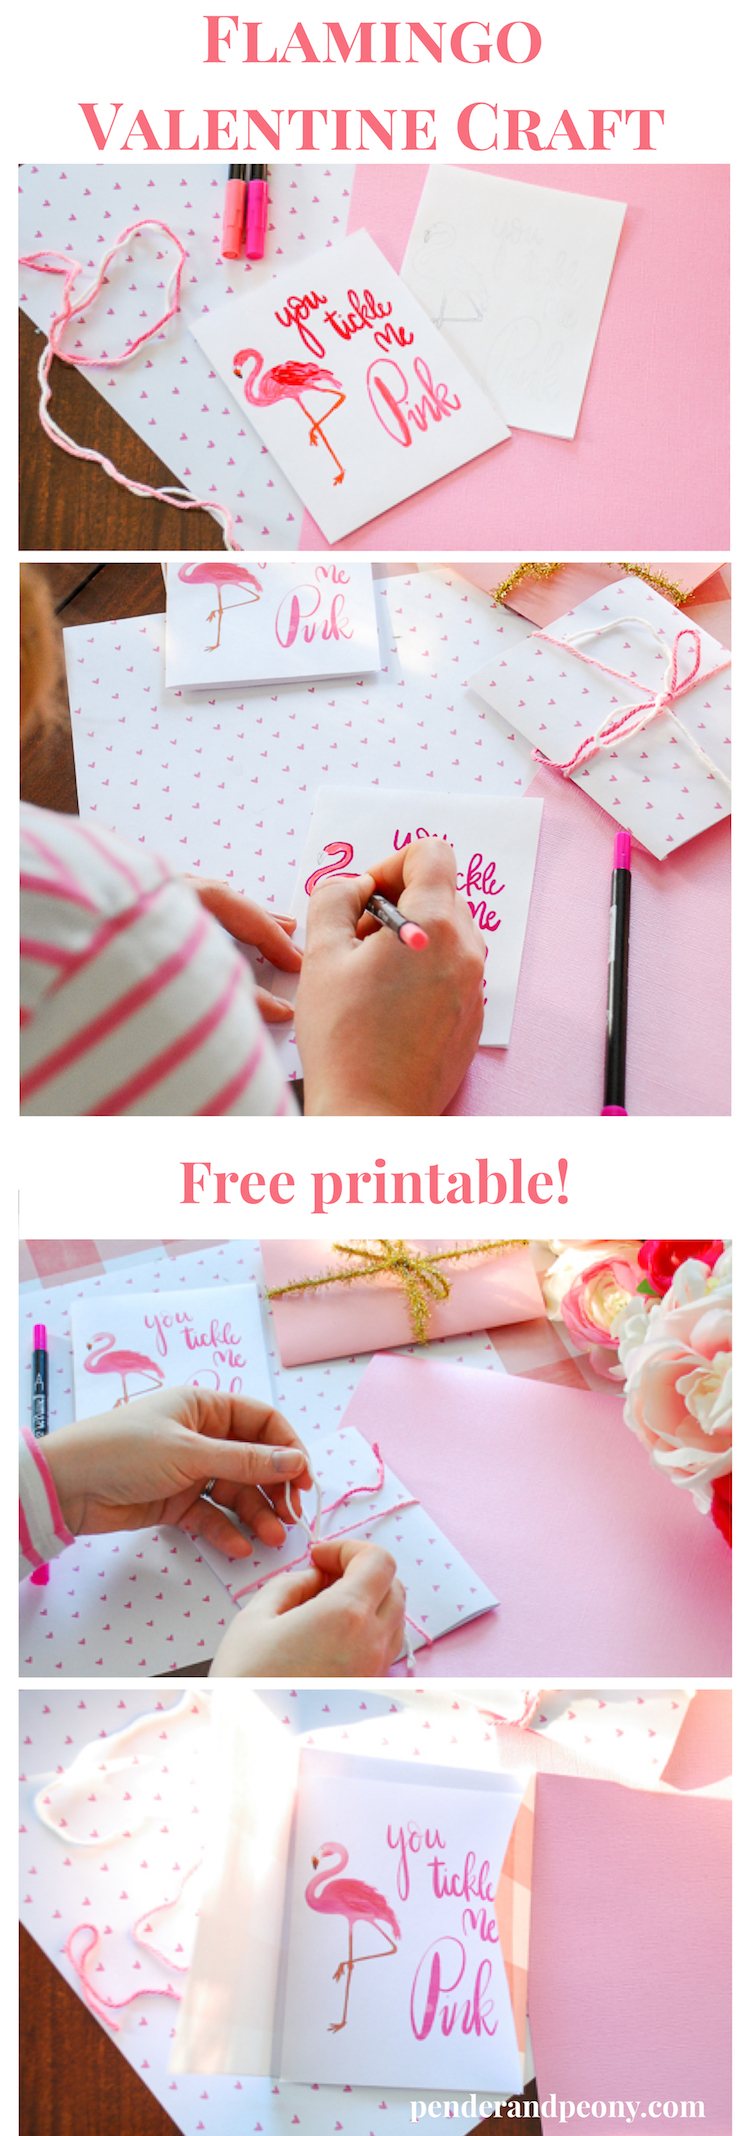 You tickle me pink free printable flamingo valentine card and DIY envelope tutorial with coloring card option.